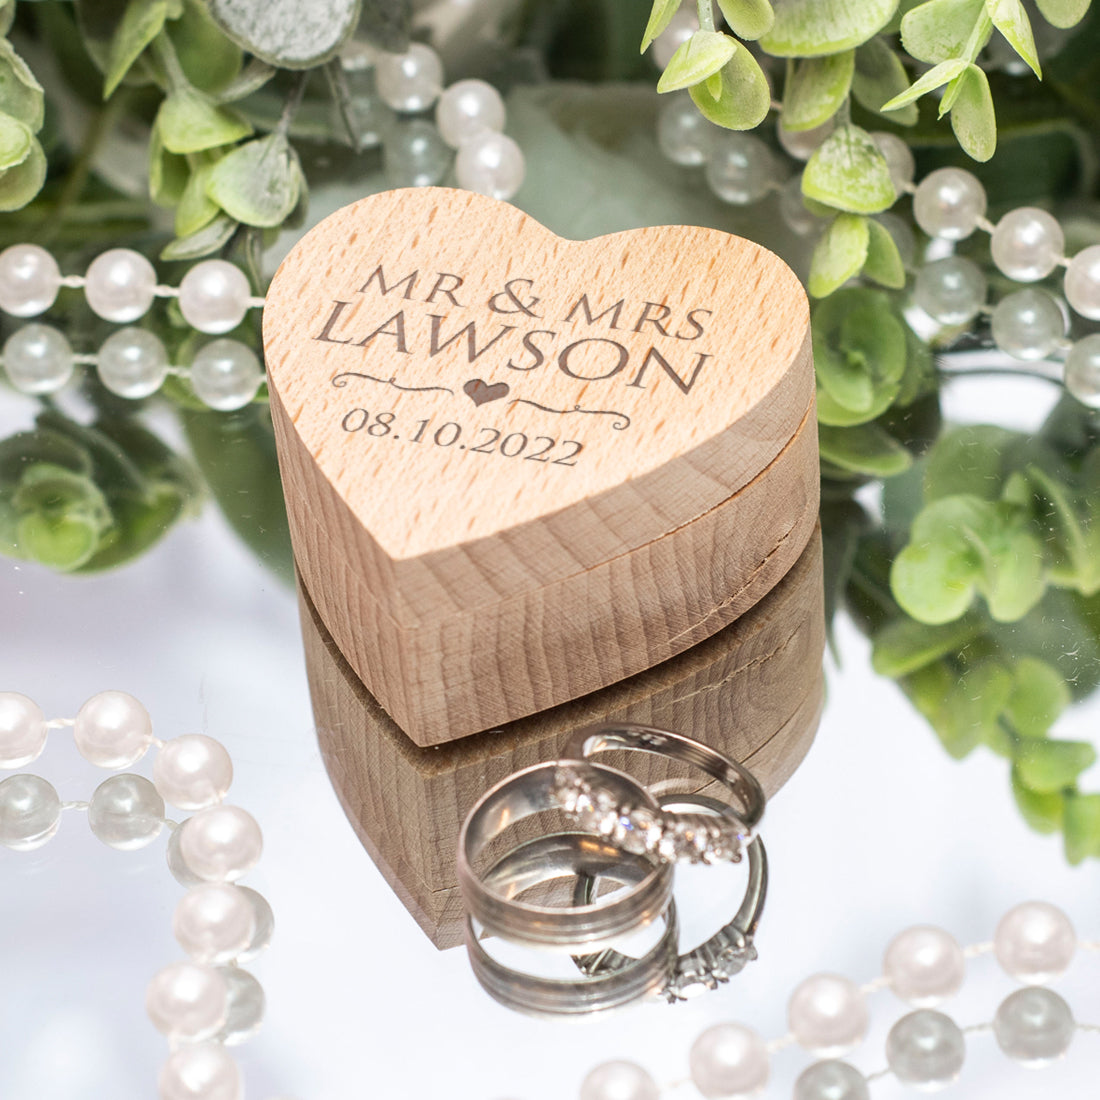 Mr & Mrs Heart Divide Engraved Wooden Heart Wedding Ring Box-Weddings by Lumi